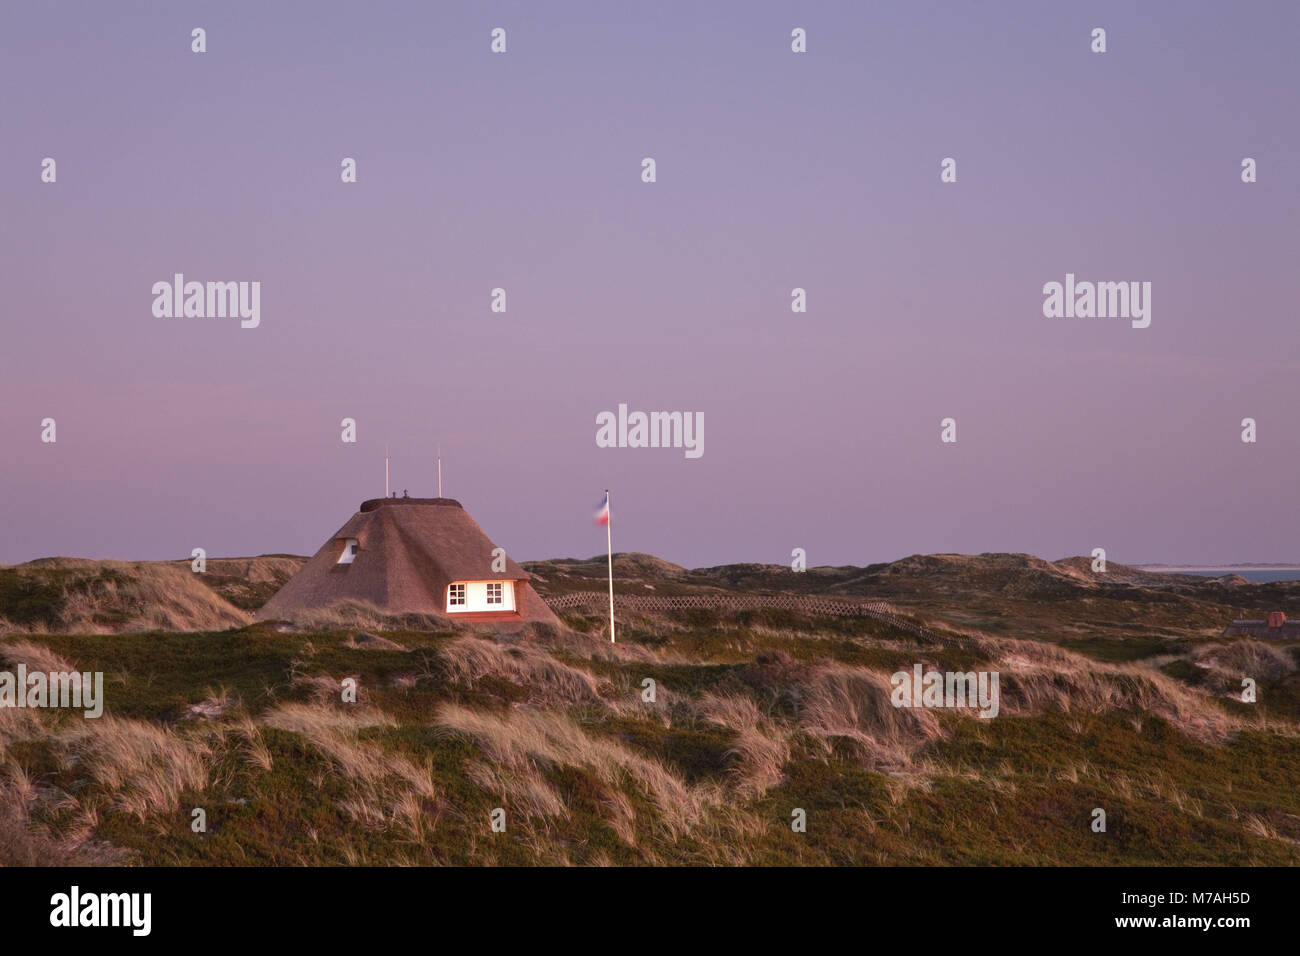 Thatched-roof houses in Hörnum, island Sylt, Schleswig - Holstein, Germany, Stock Photo